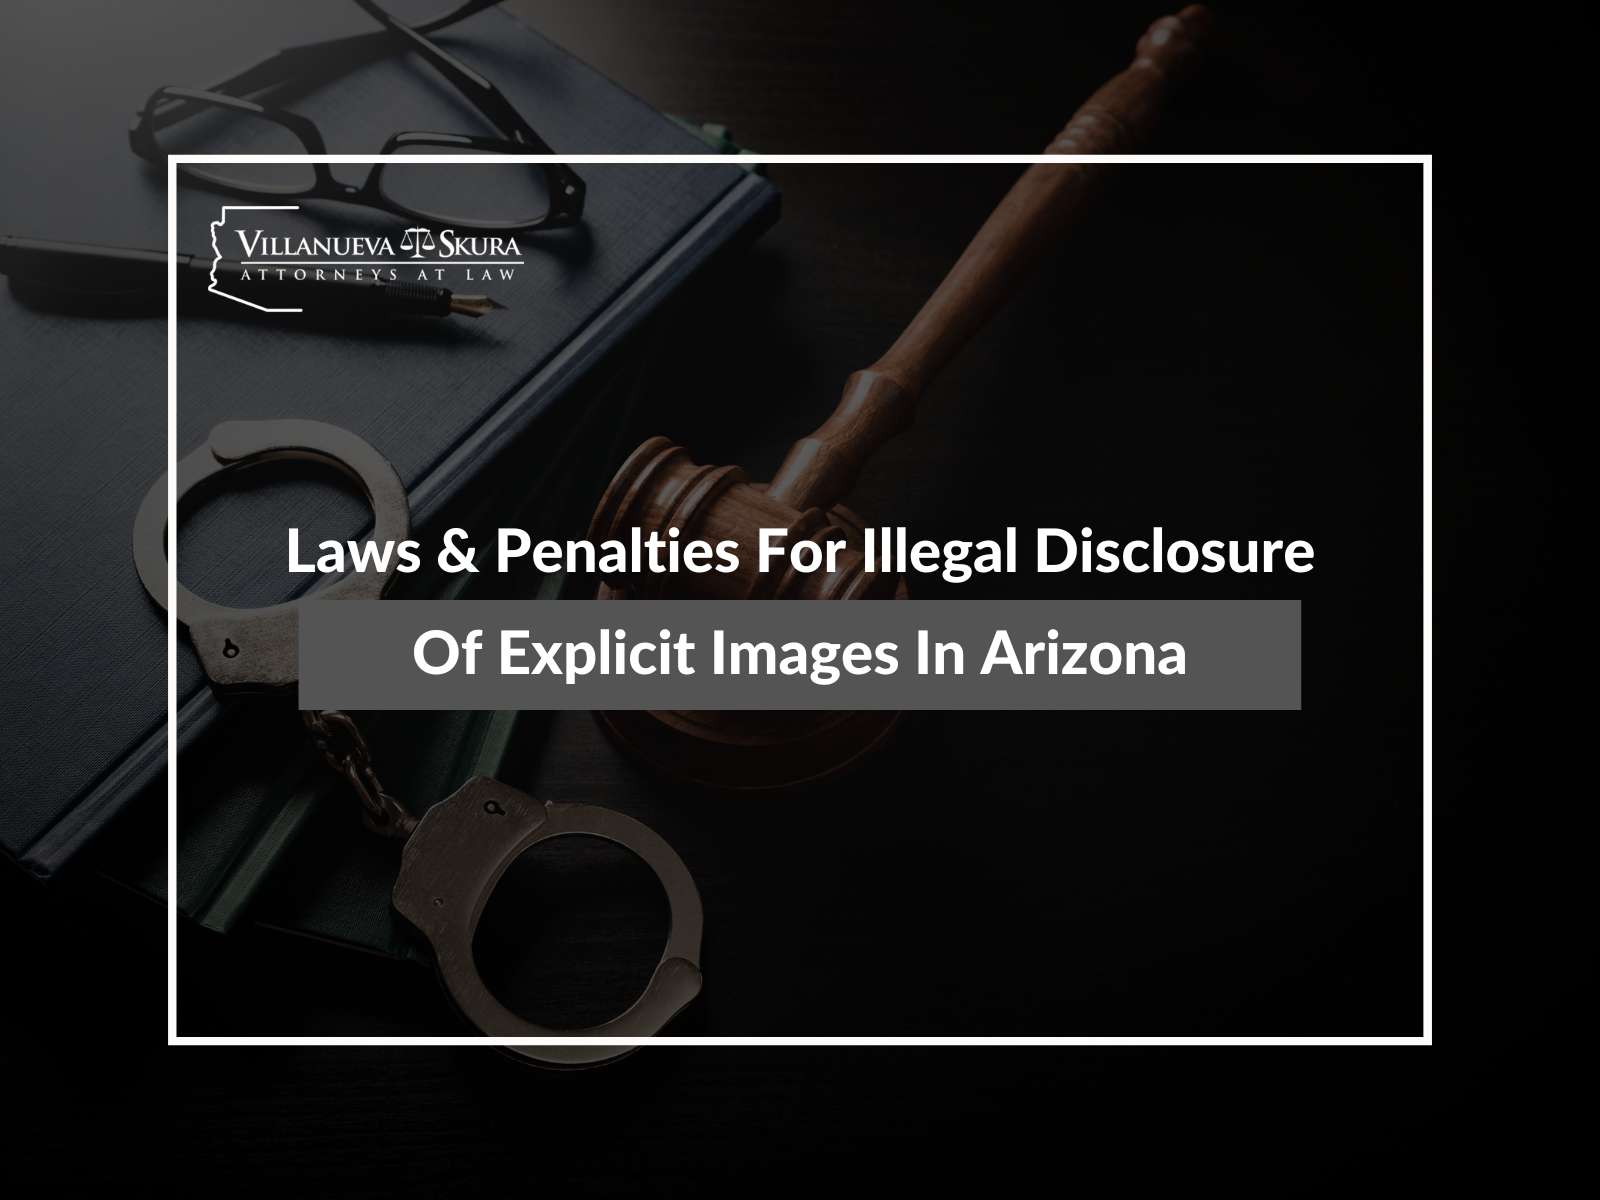 Laws & Penalties For Illegal Disclosure Of Explicit Images In Arizona